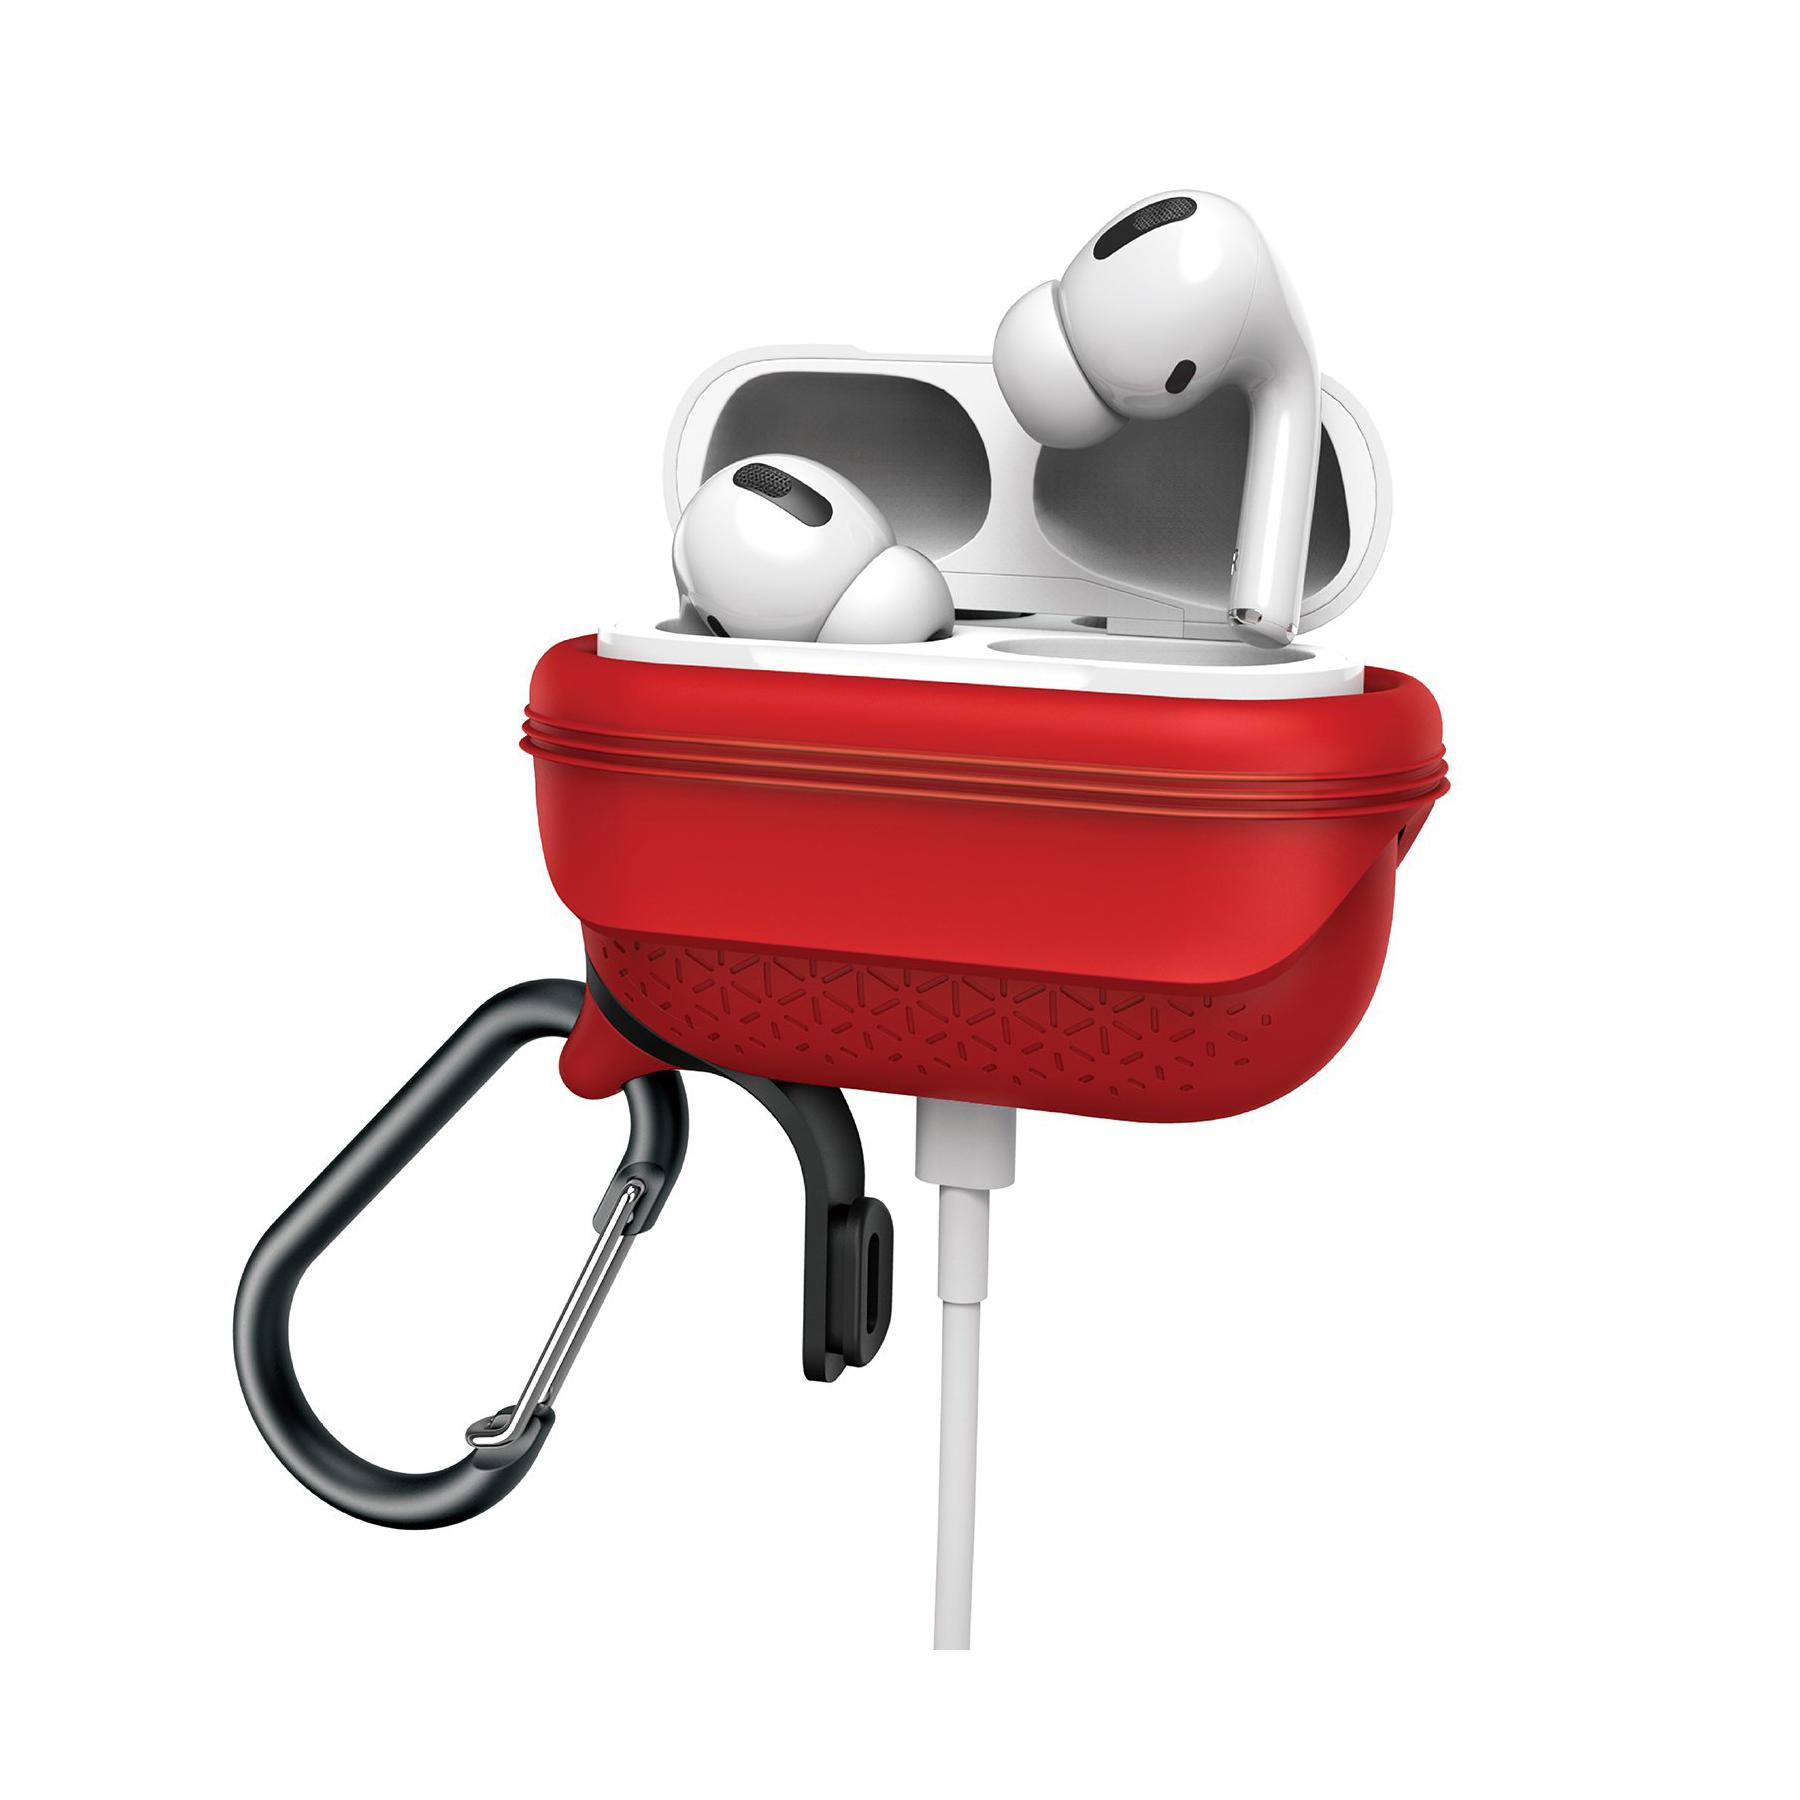 Catalyst Waterproof Premium Edition Apple AirPods Pro Case - Flame Red